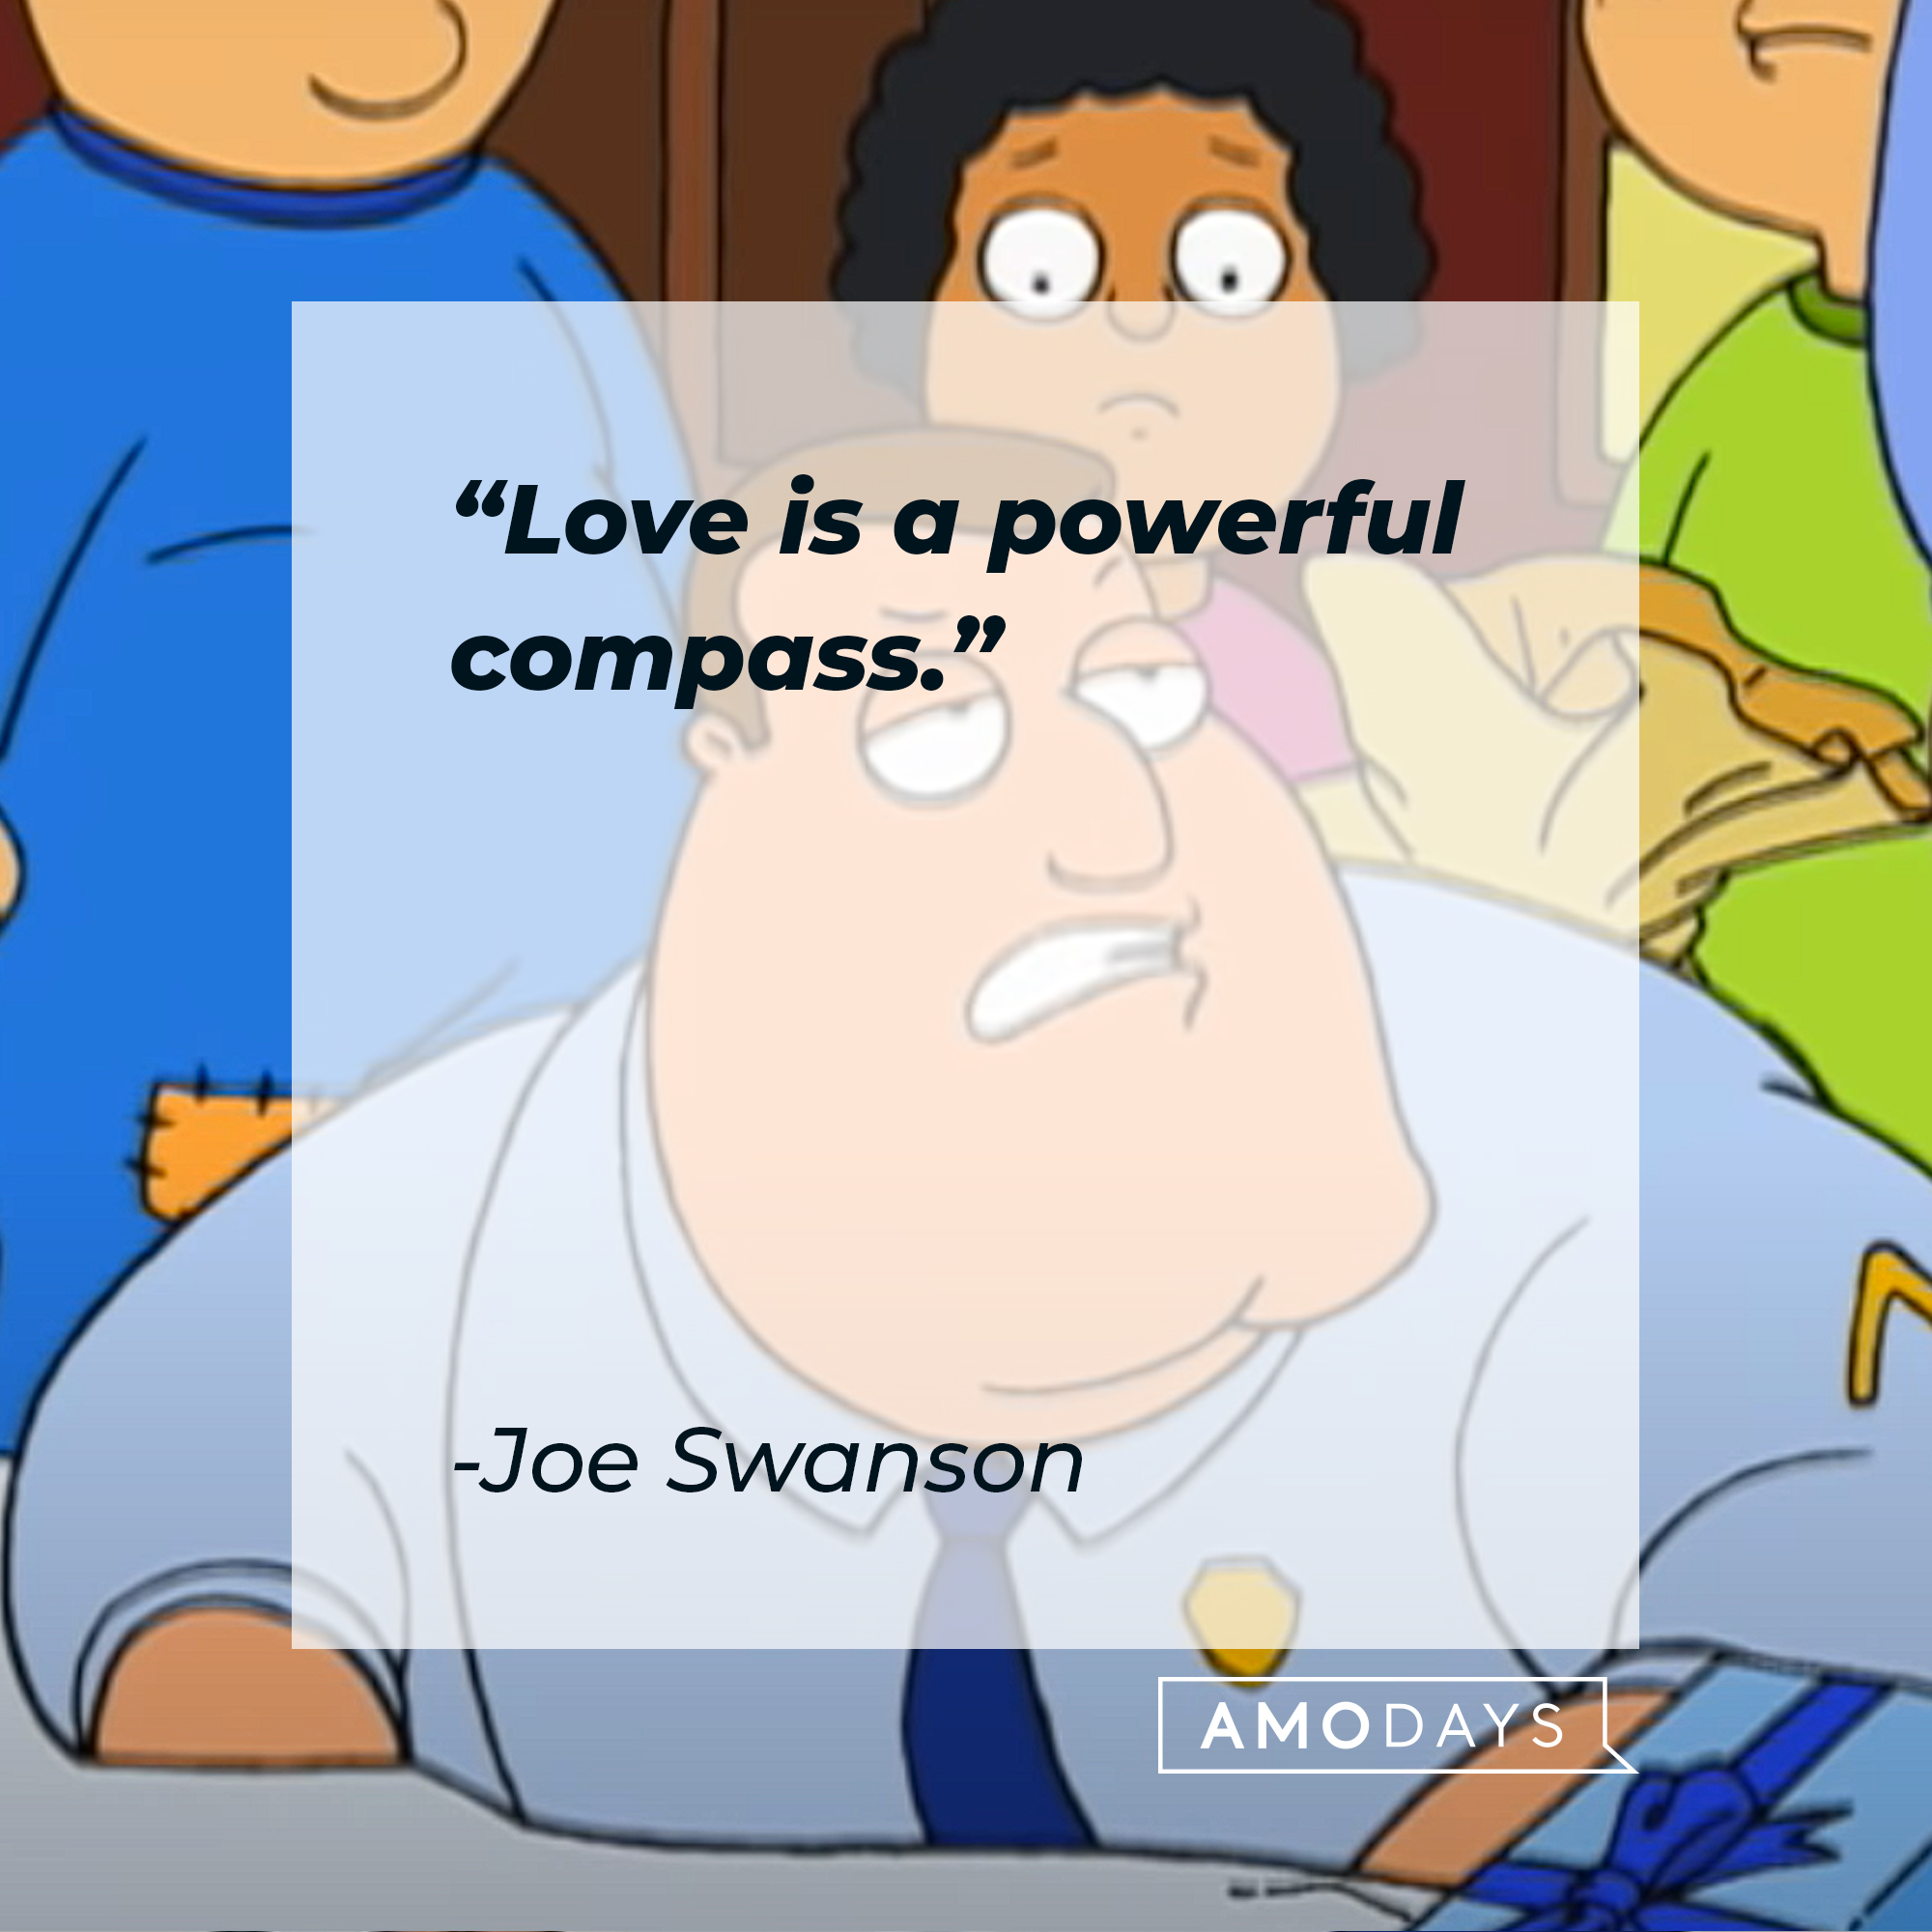 Joe Swanson from "Family Guy" with his quote: “Love is a powerful compass.” | Source: YouTube.com/TBS